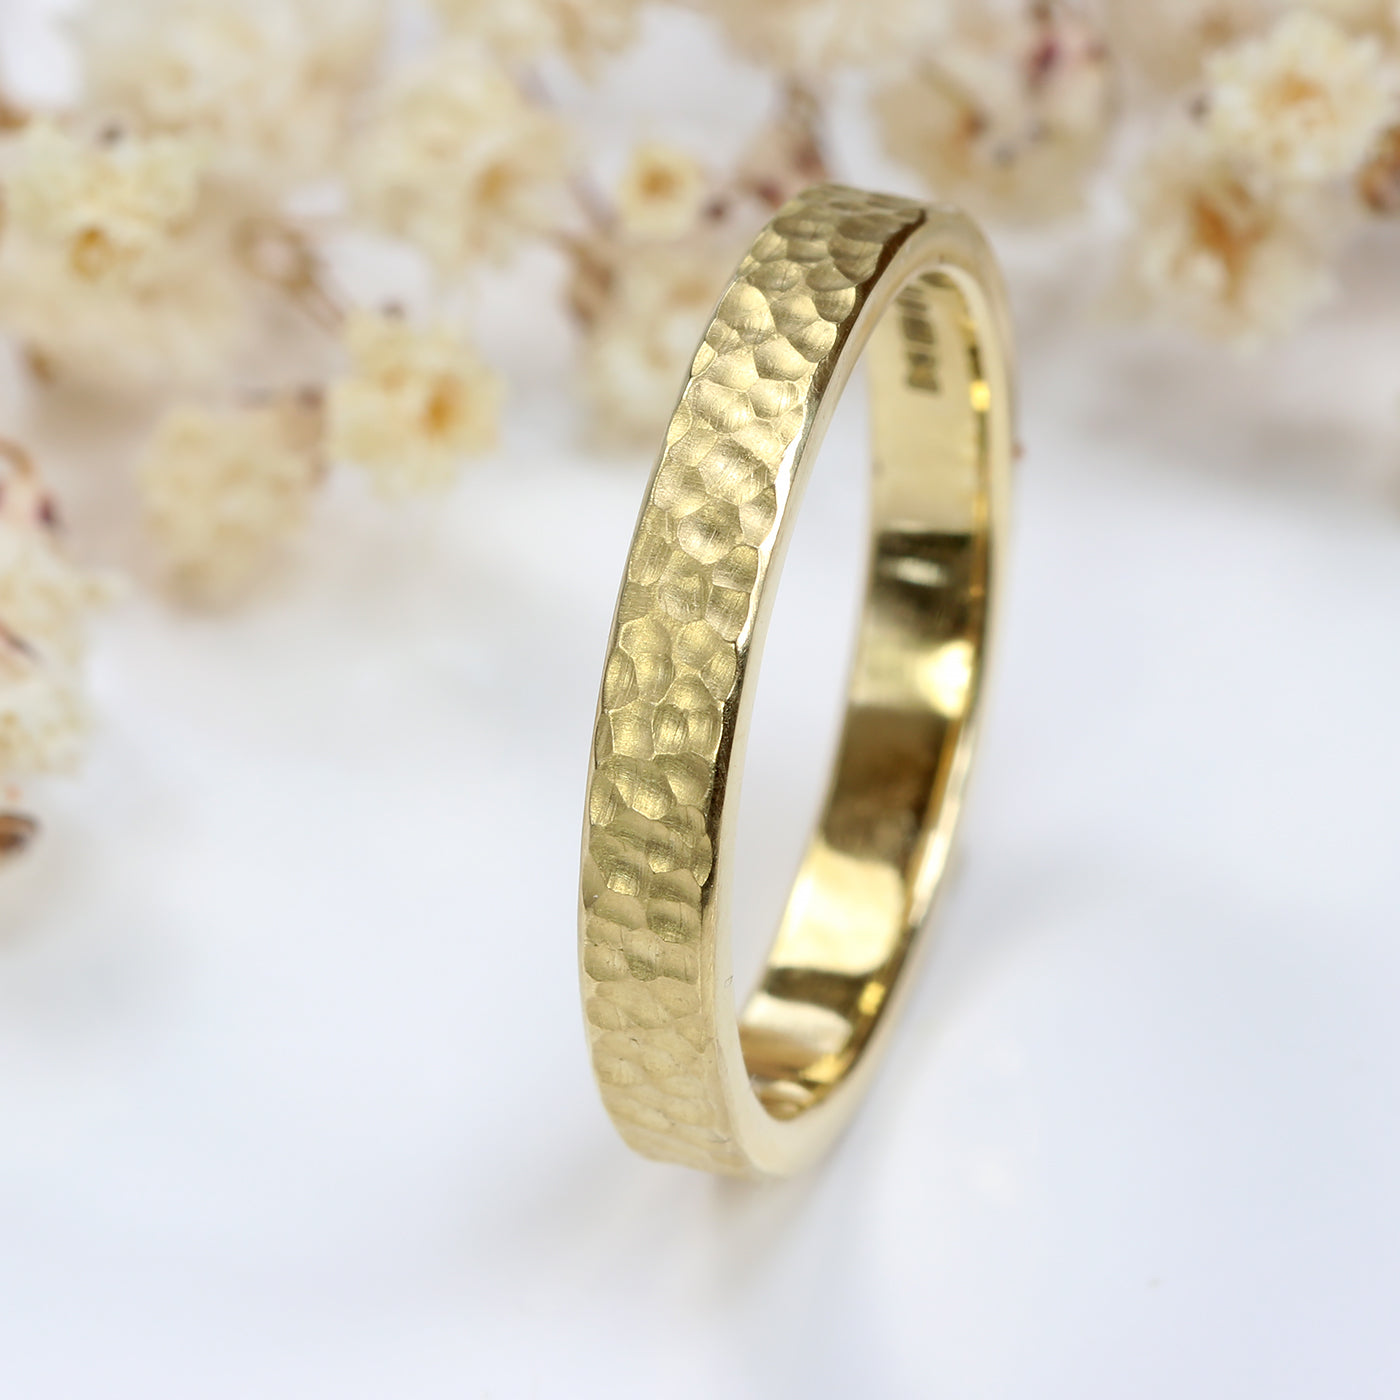 3mm Flat Hammered Wedding Ring in 18ct Yellow Gold – Size N 1/2 (Resize G – O)